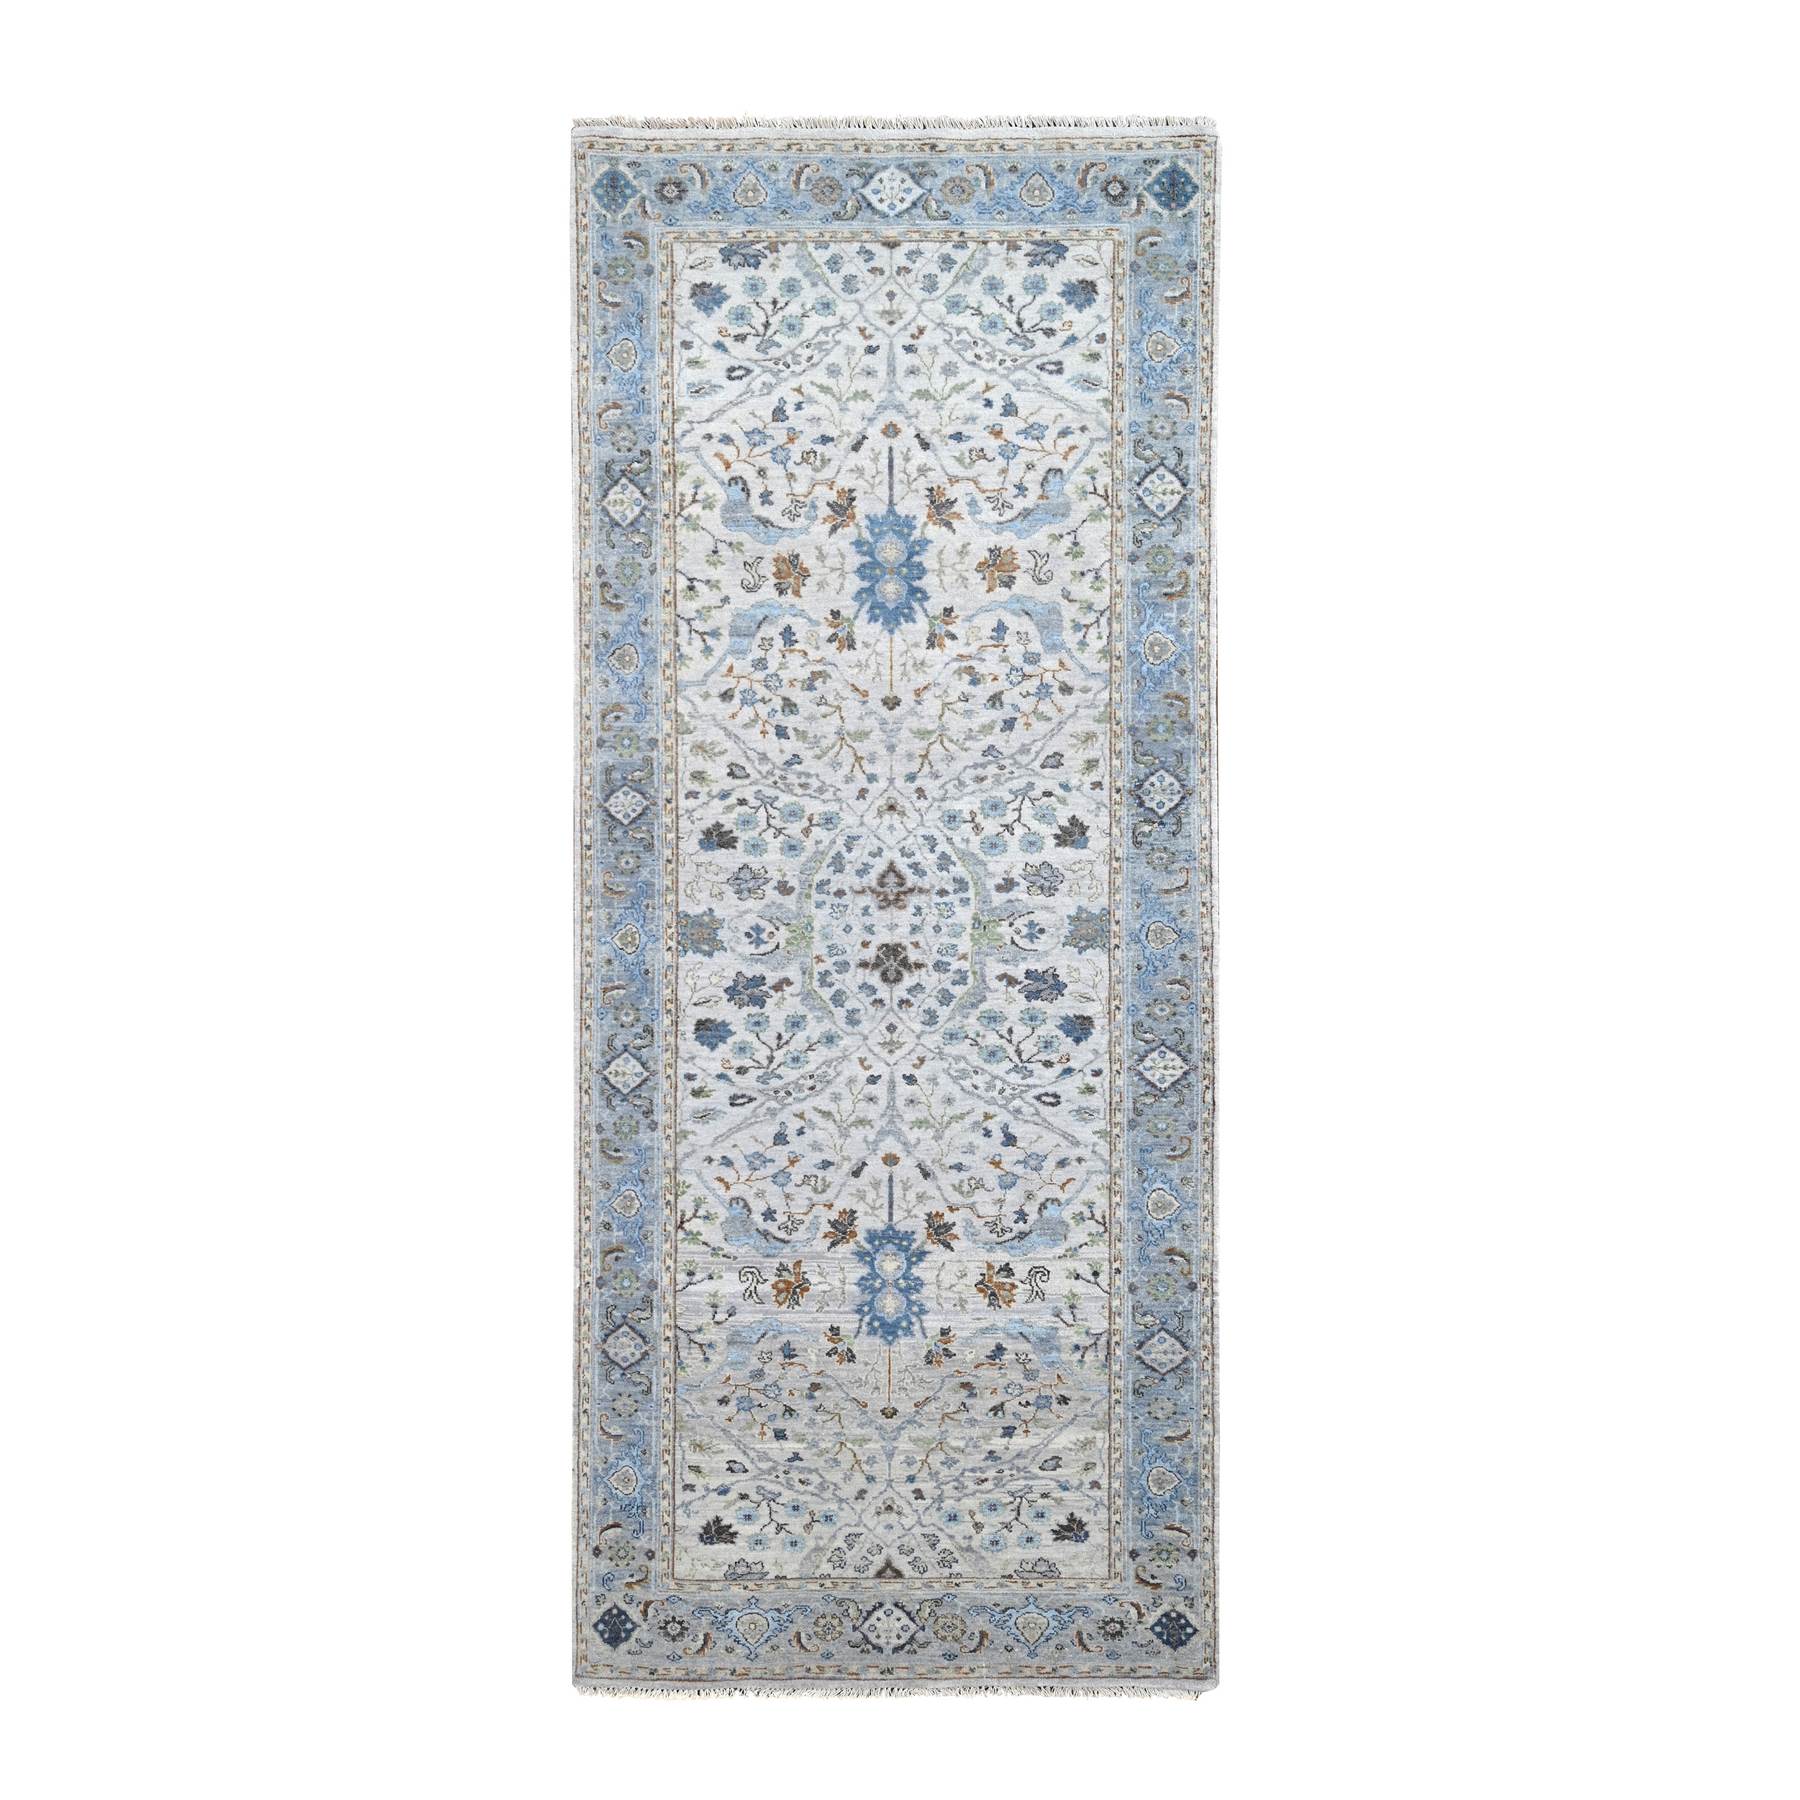 Misty Gray, Denser Weave, Oushak with Floral Motifs, Soft Wool, Hand Knotted, Vegetable Dyes, Wide Runner Oriental Rug 